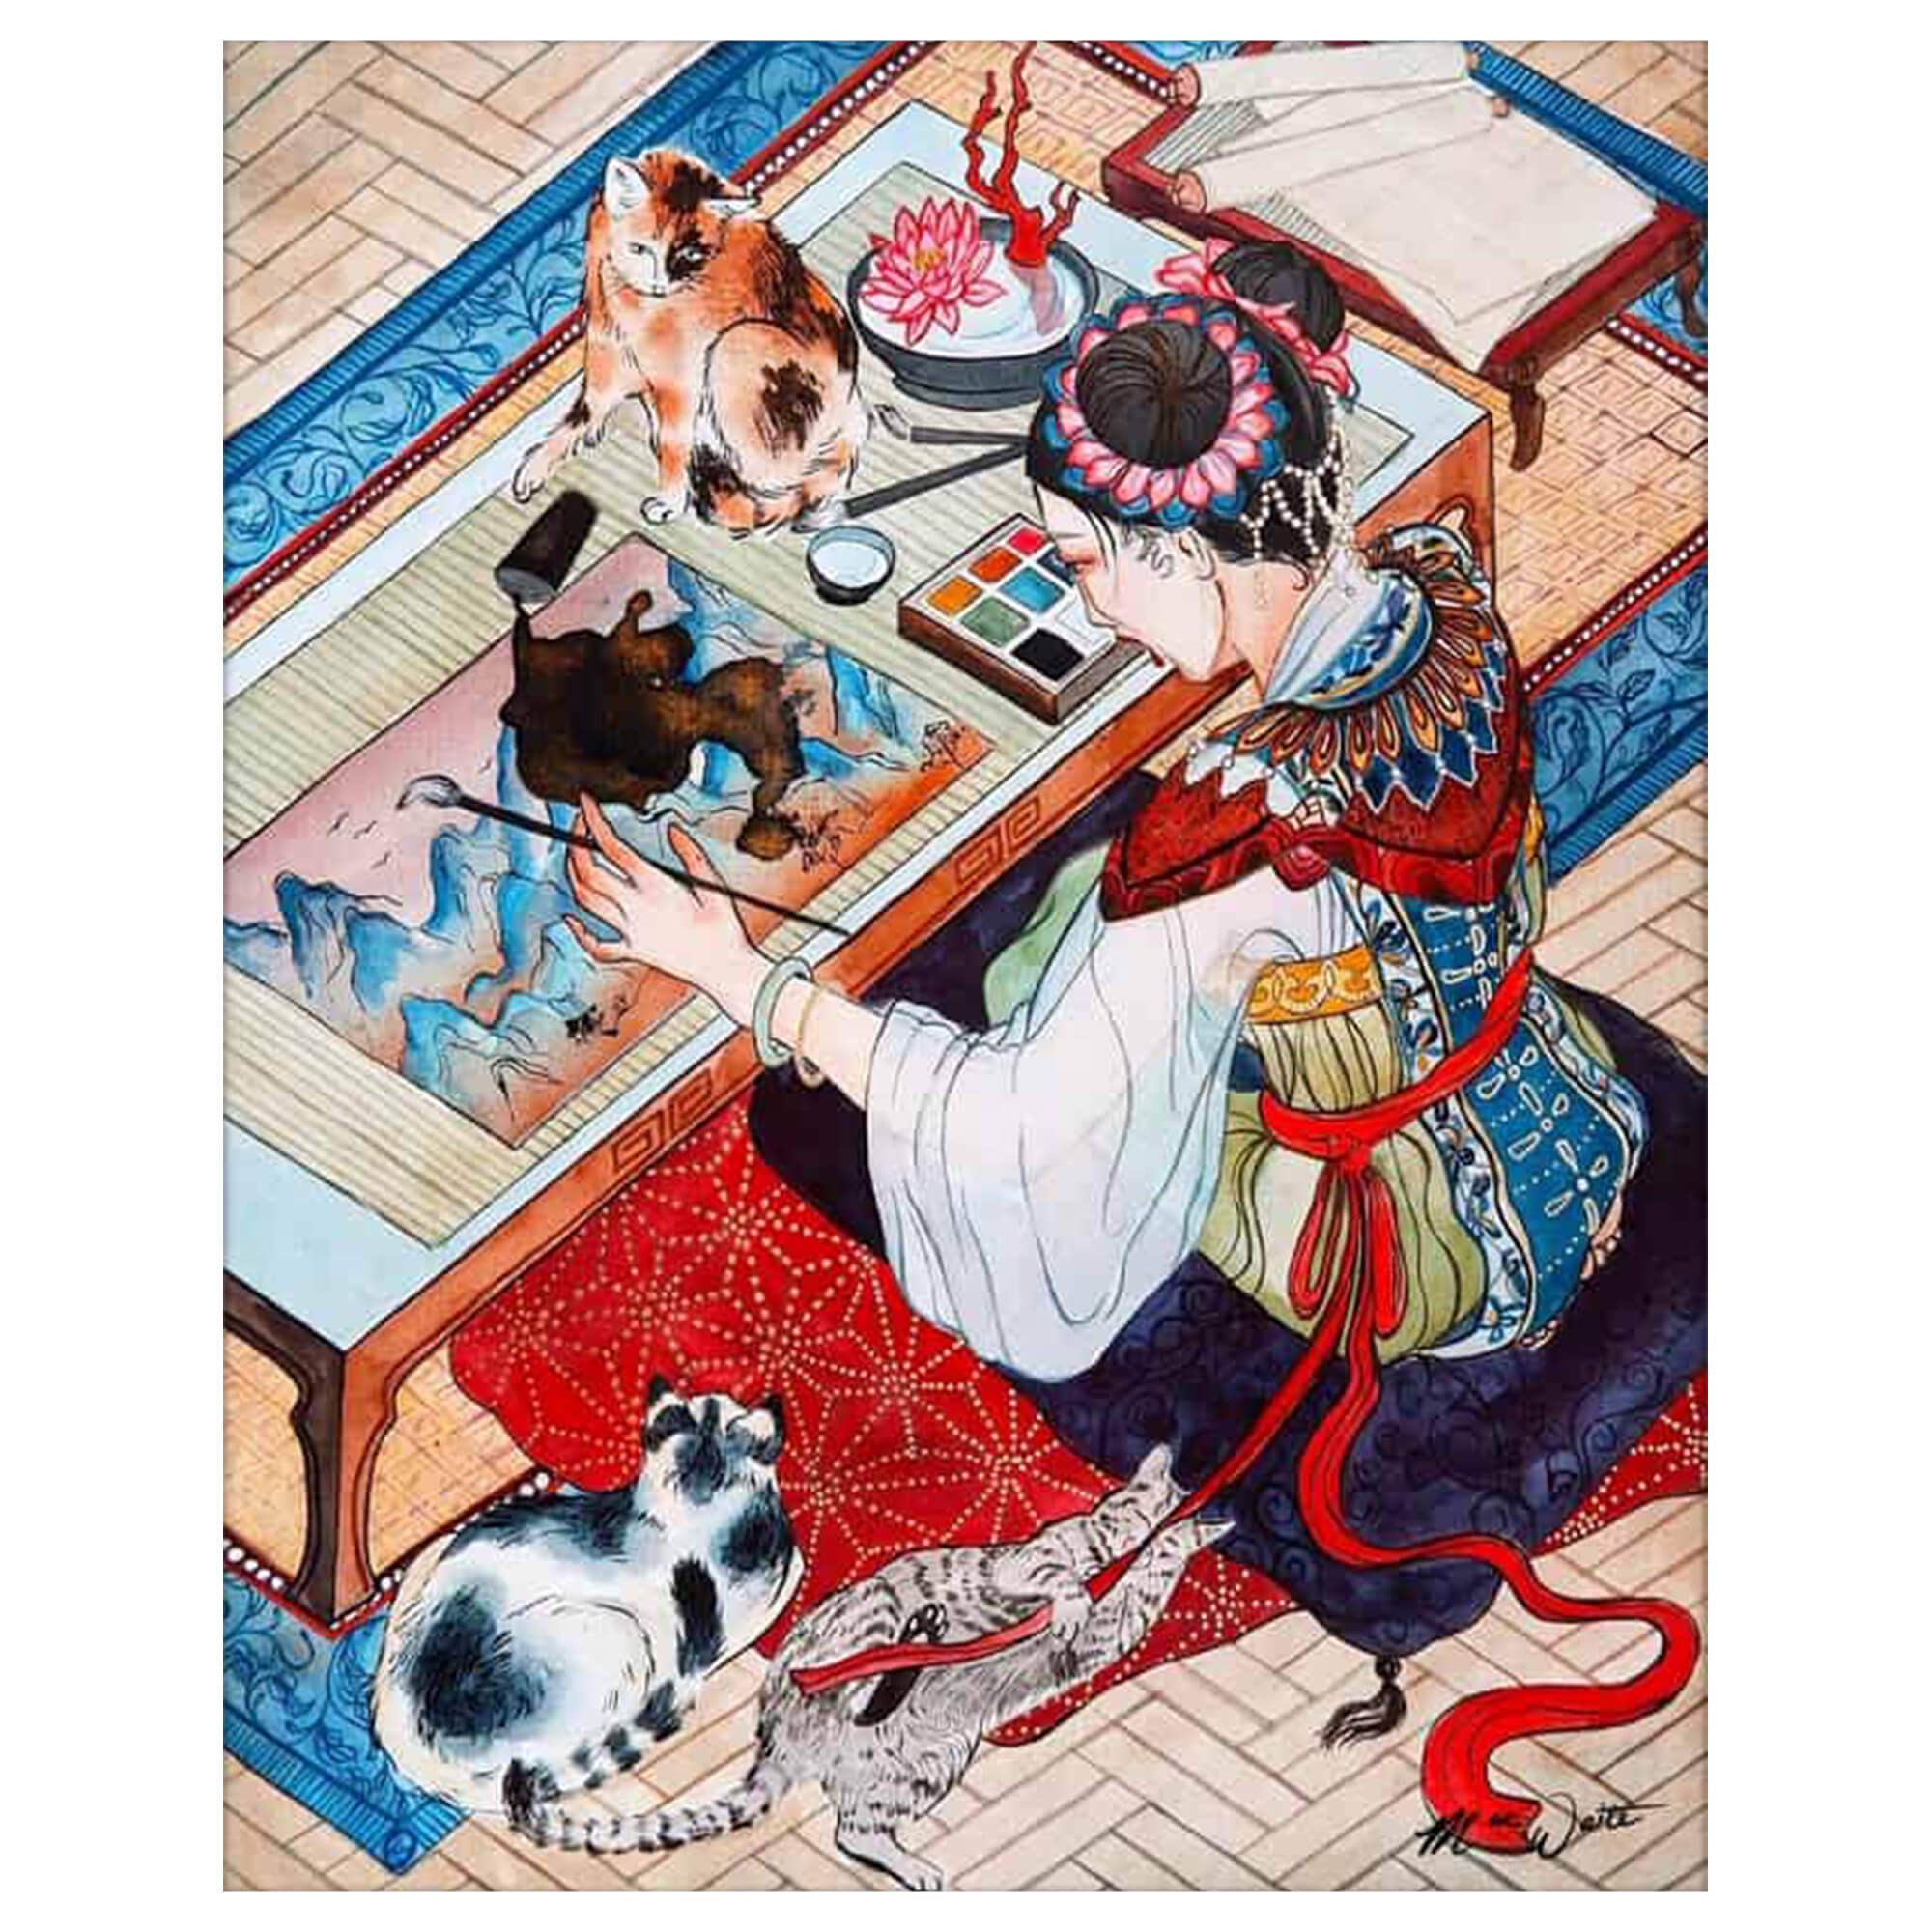 A matted art print of of a cat lady and her painting by Hawaii artist Mae Waite